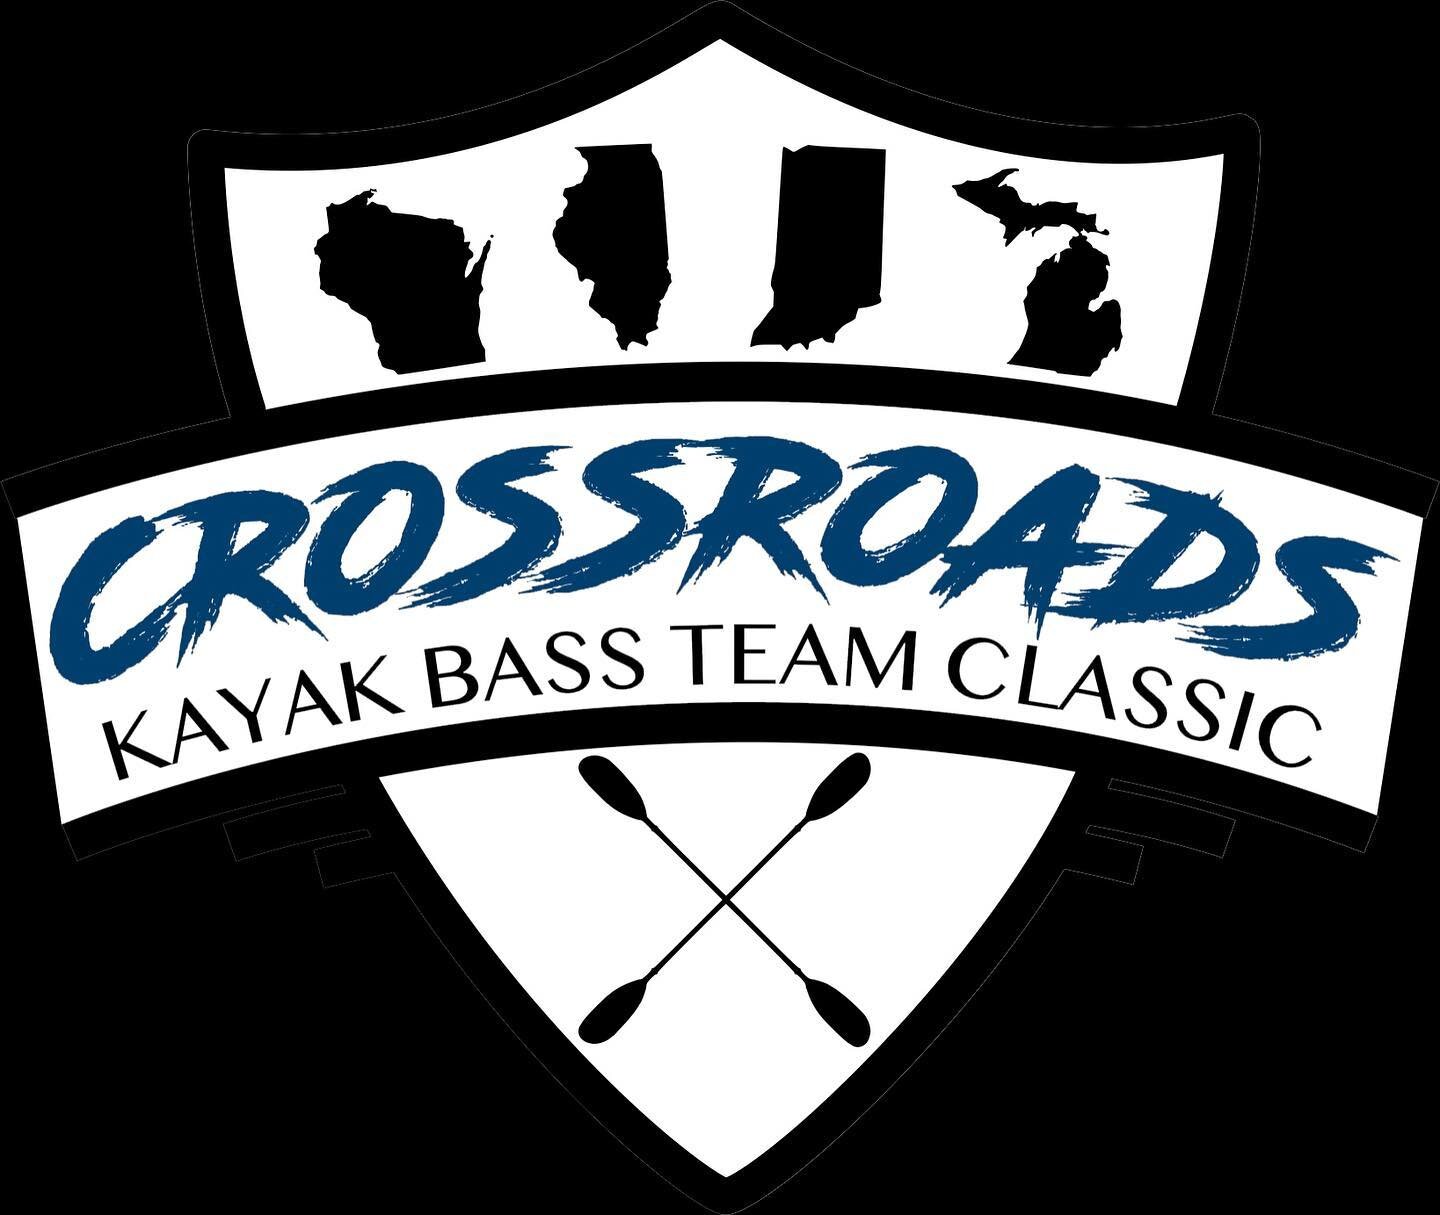 @crossroads_classic is happening this weekend! Follow along with the leaderboard. This was a real cool event to cover last year. https://live.tourneyx.com/?id=9691&amp;fbclid=IwAR2mXWp3OPSCZxCta47UxMAf4k_Qfji_s03ANog3a18HyCIcwbJNQSX8sa0